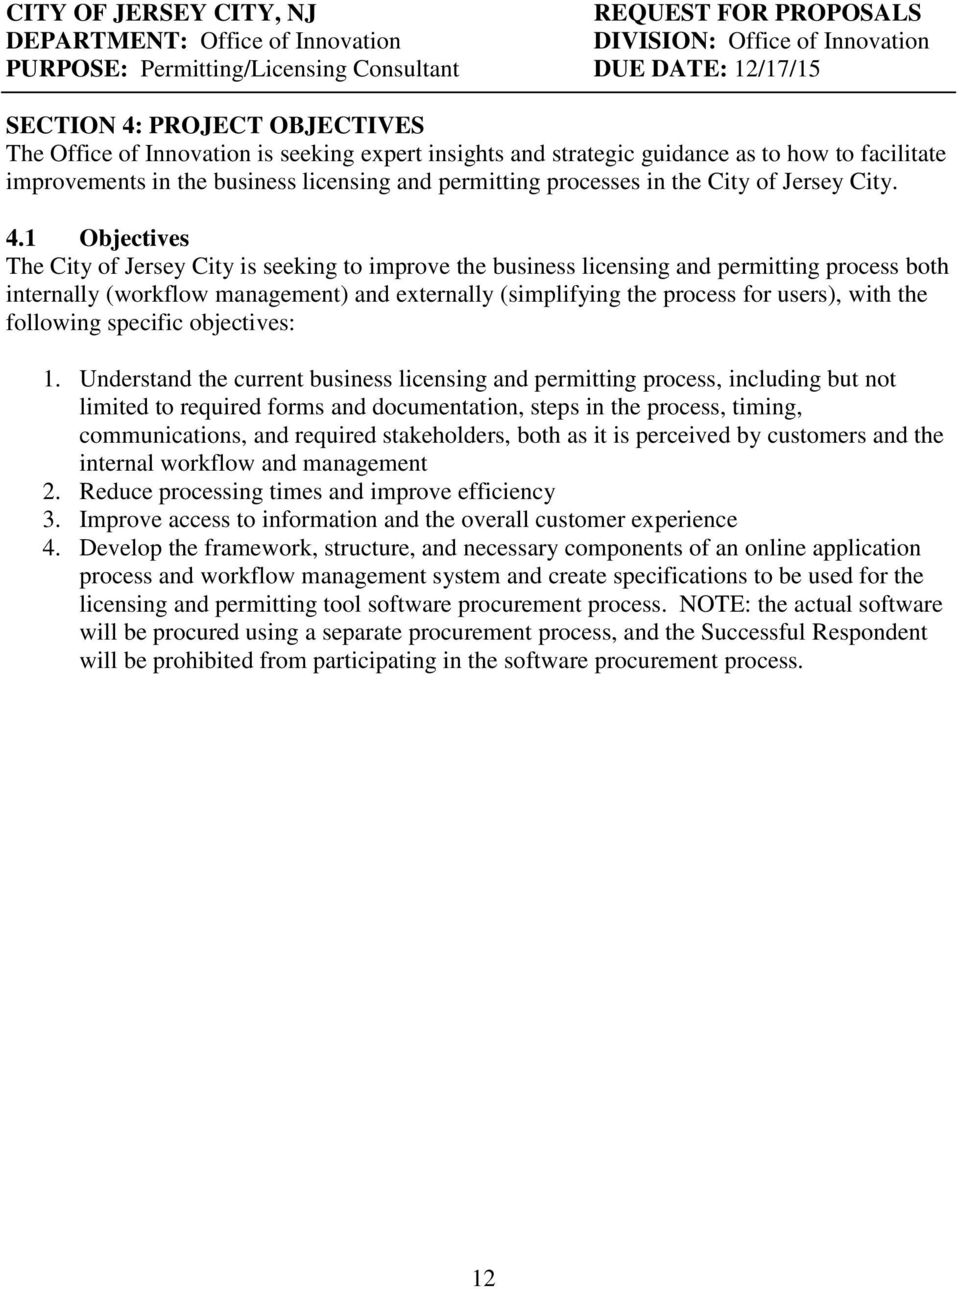 1 Objectives The City of Jersey City is seeking to improve the business licensing and permitting process both internally (workflow management) and externally (simplifying the process for users), with